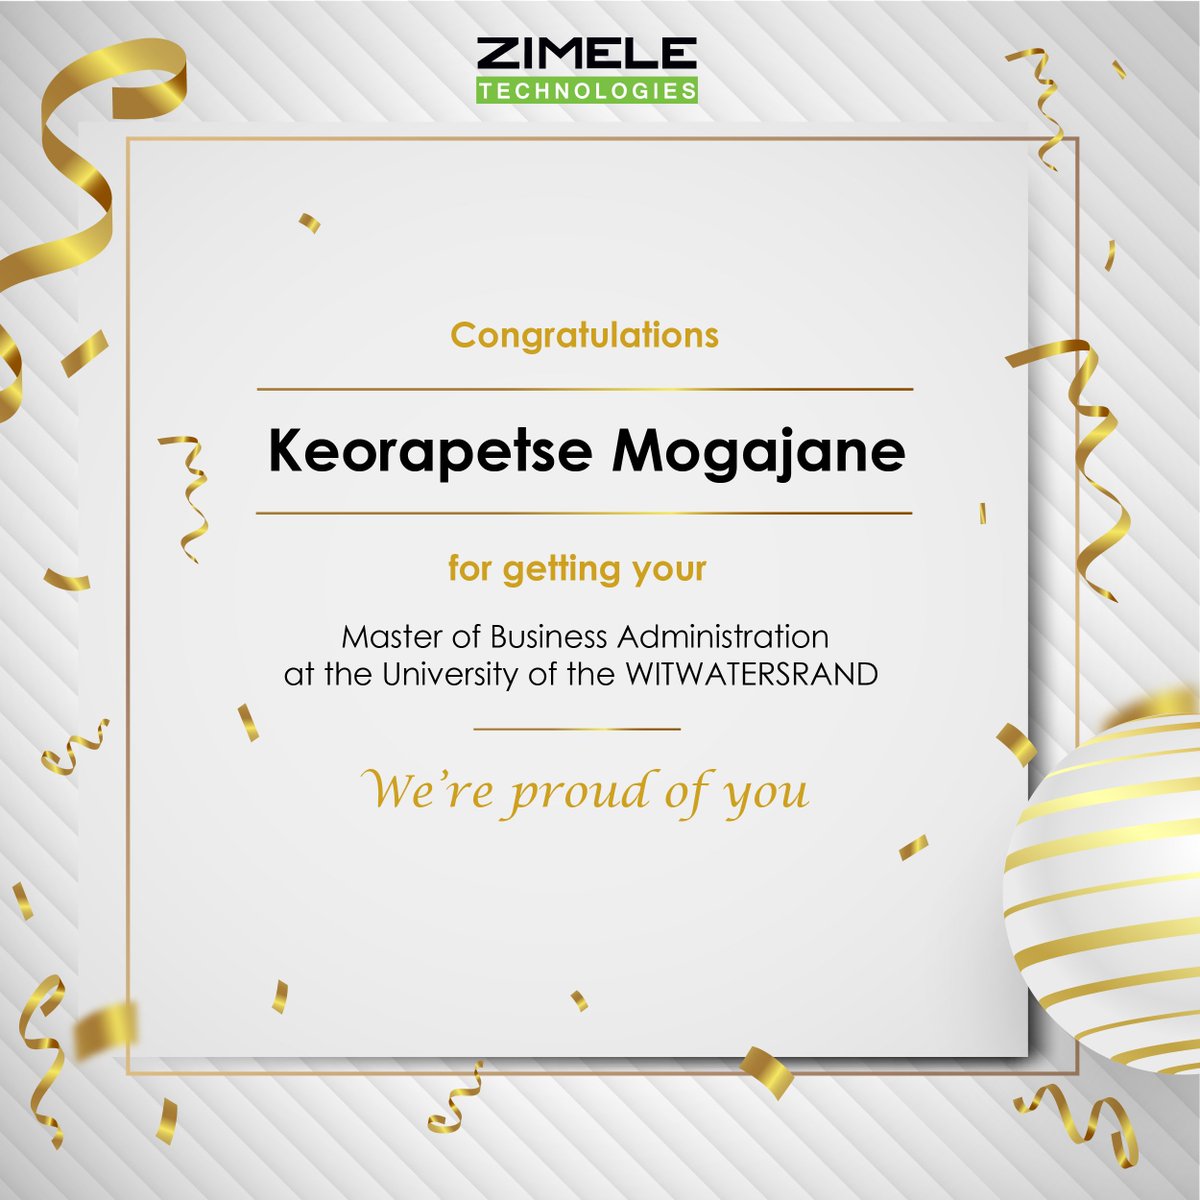 Keorapetse Mogajane, Congrats on your outstanding achievement. 

This is a significant milestone!

All the best for the future @ its challenges & opportunities.

You are a true inspiration! 

#ProudMoment
#EducationalMilestone
#ZimeleTechnologies
#CuttingThroughTheITclutter